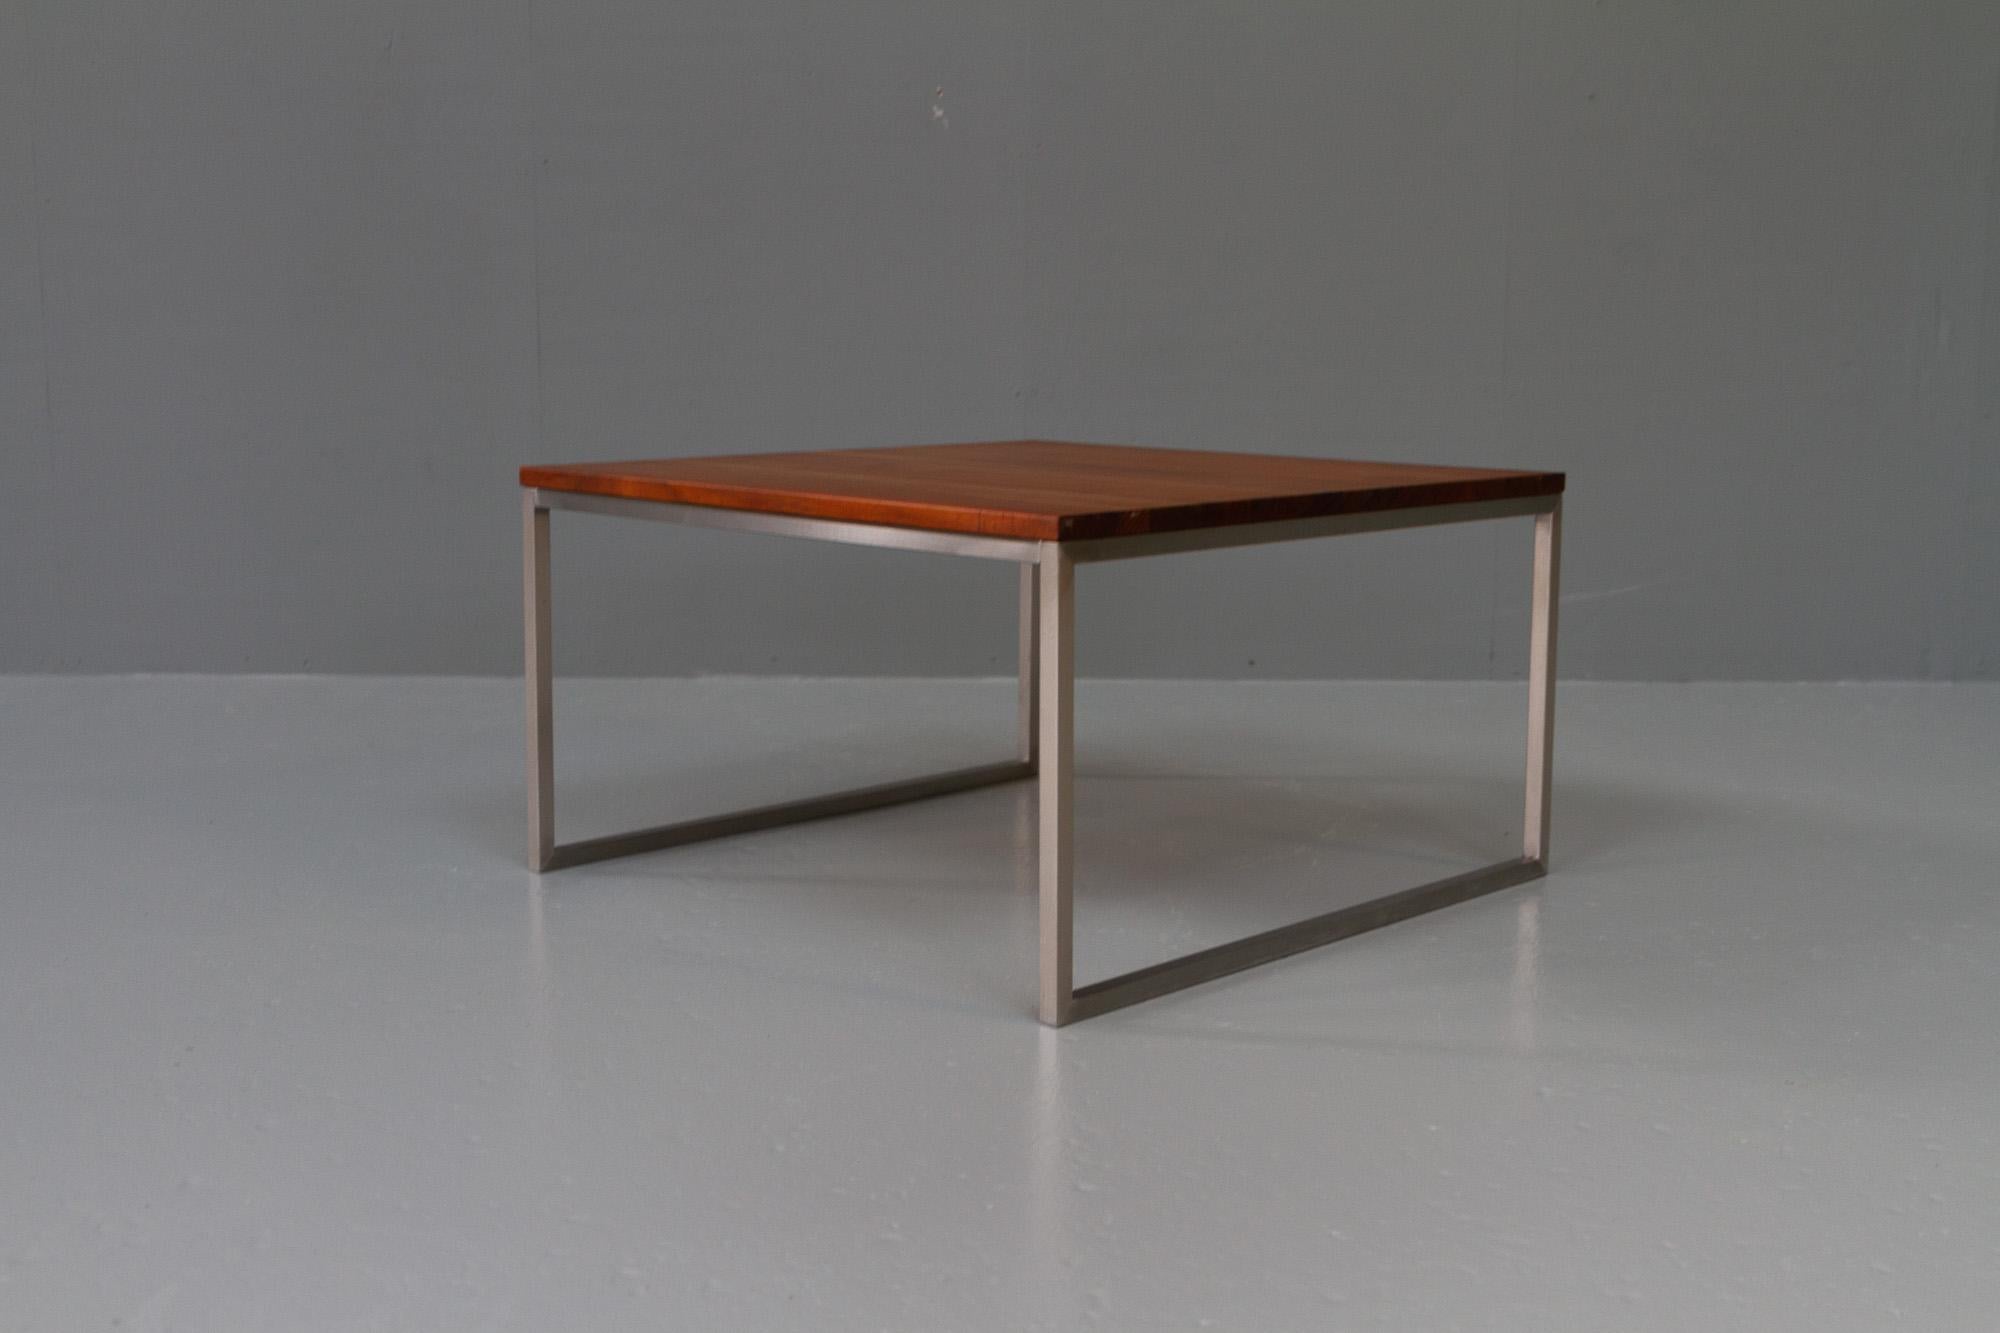 Vintage Danish Modern teak coffee table, 1960s.
Minimalist elegance and cubic design in this side table designed and manufactured in Denmark in the 1960s. Designed in the style of Danish architect Poul Kjærholm.
Table top in solid teak with a